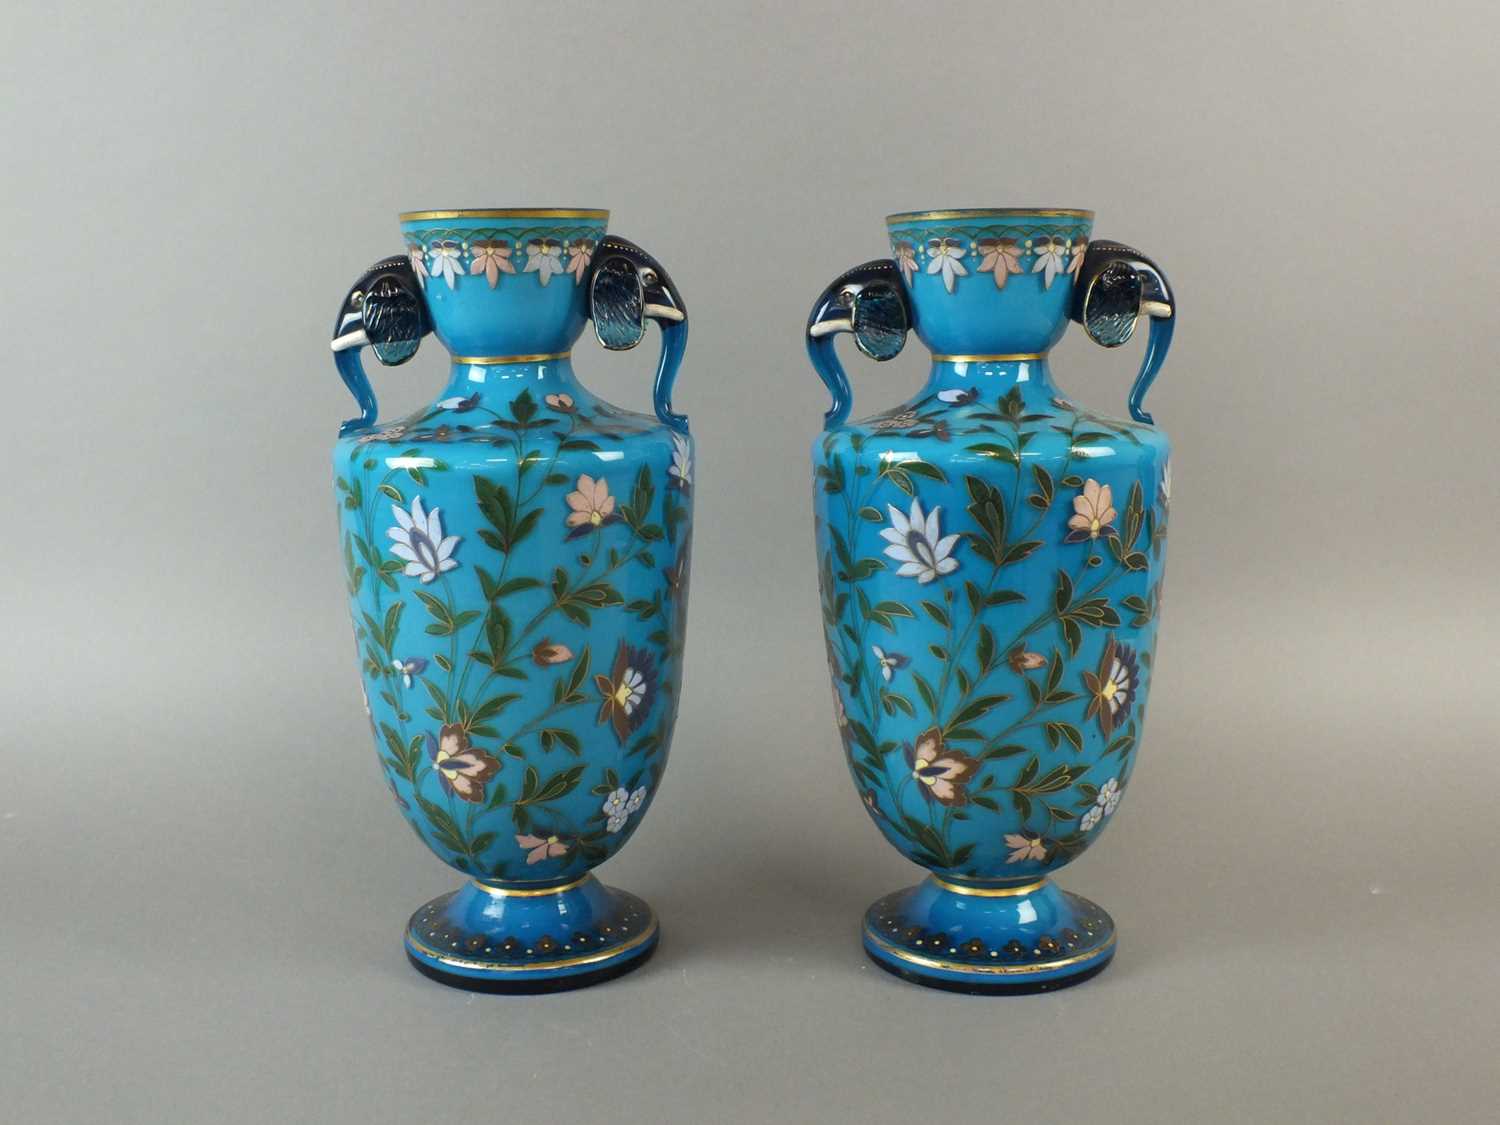 Lot 13 - A pair of late 19th century Continental glass vases